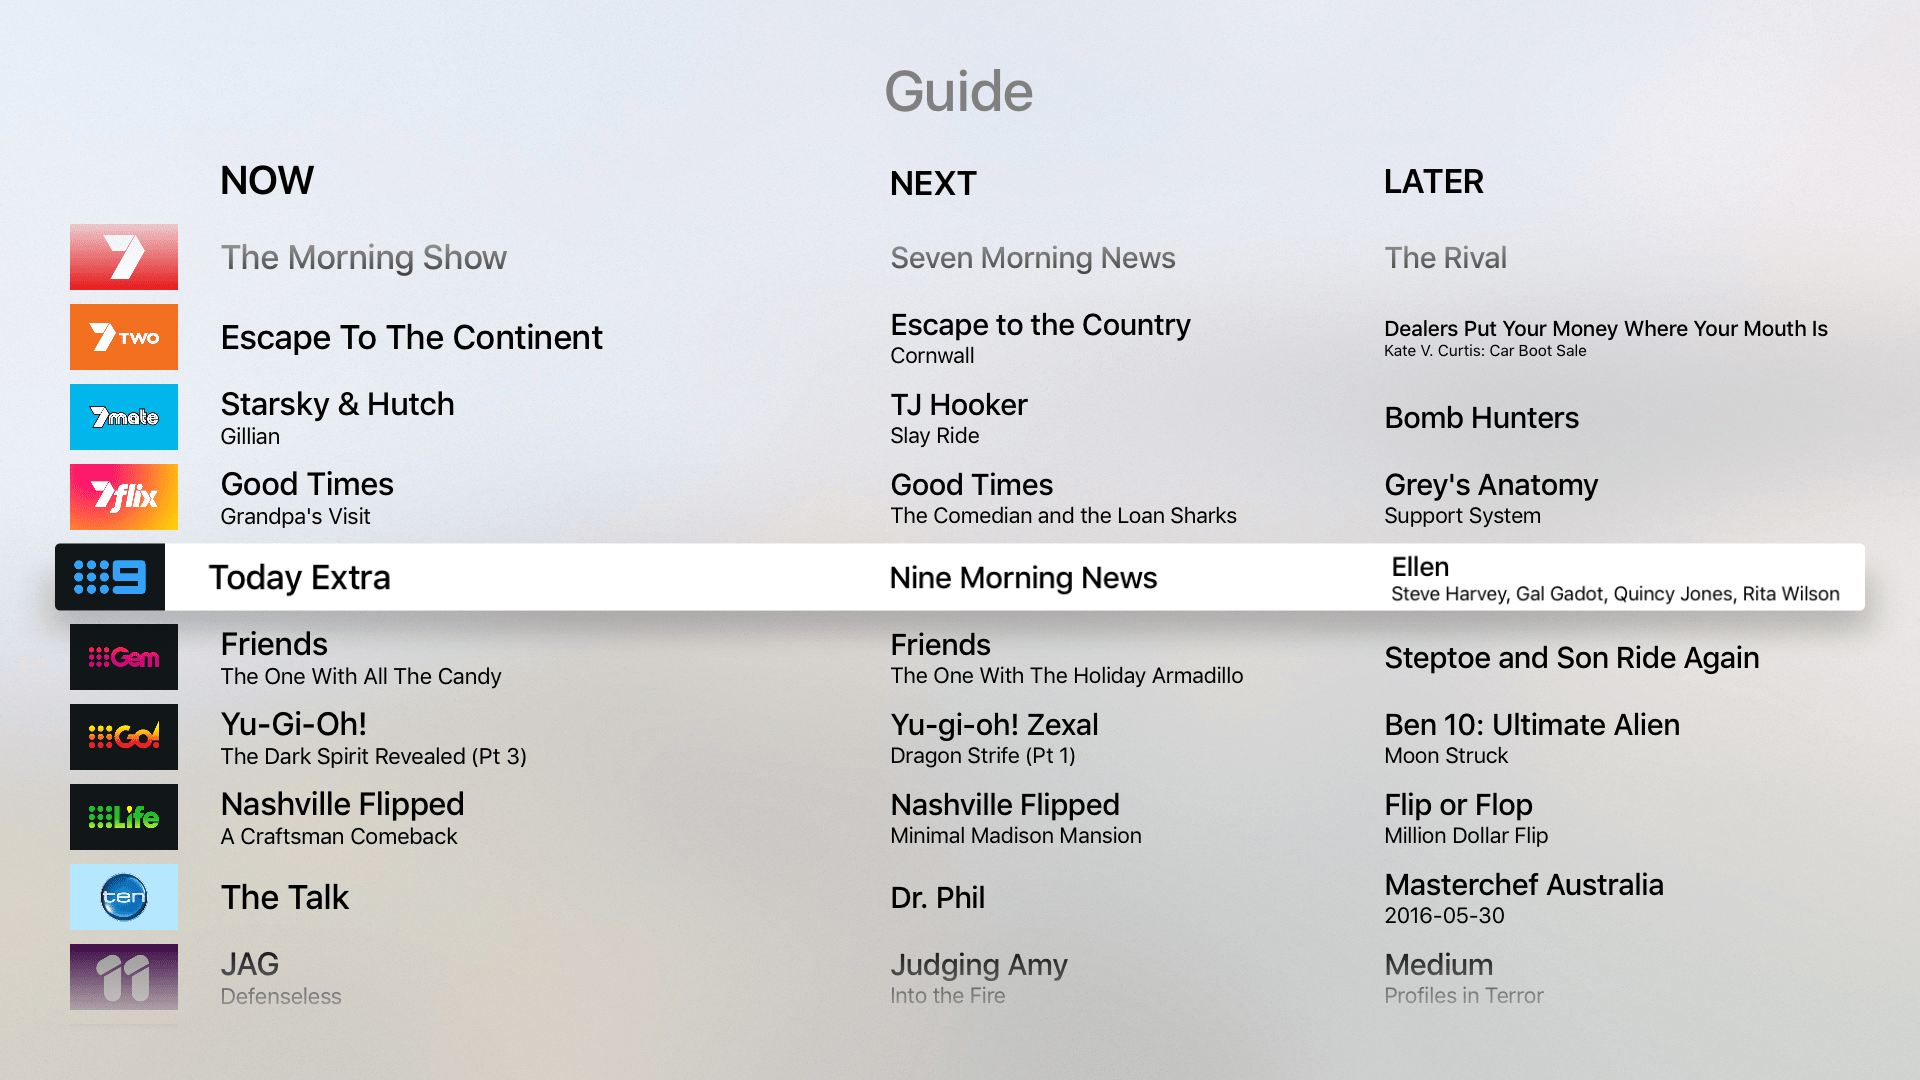 The 'Guide' view in the Streamee Apple TV app, featuring a table of TV channels and the shows on now, next, and later